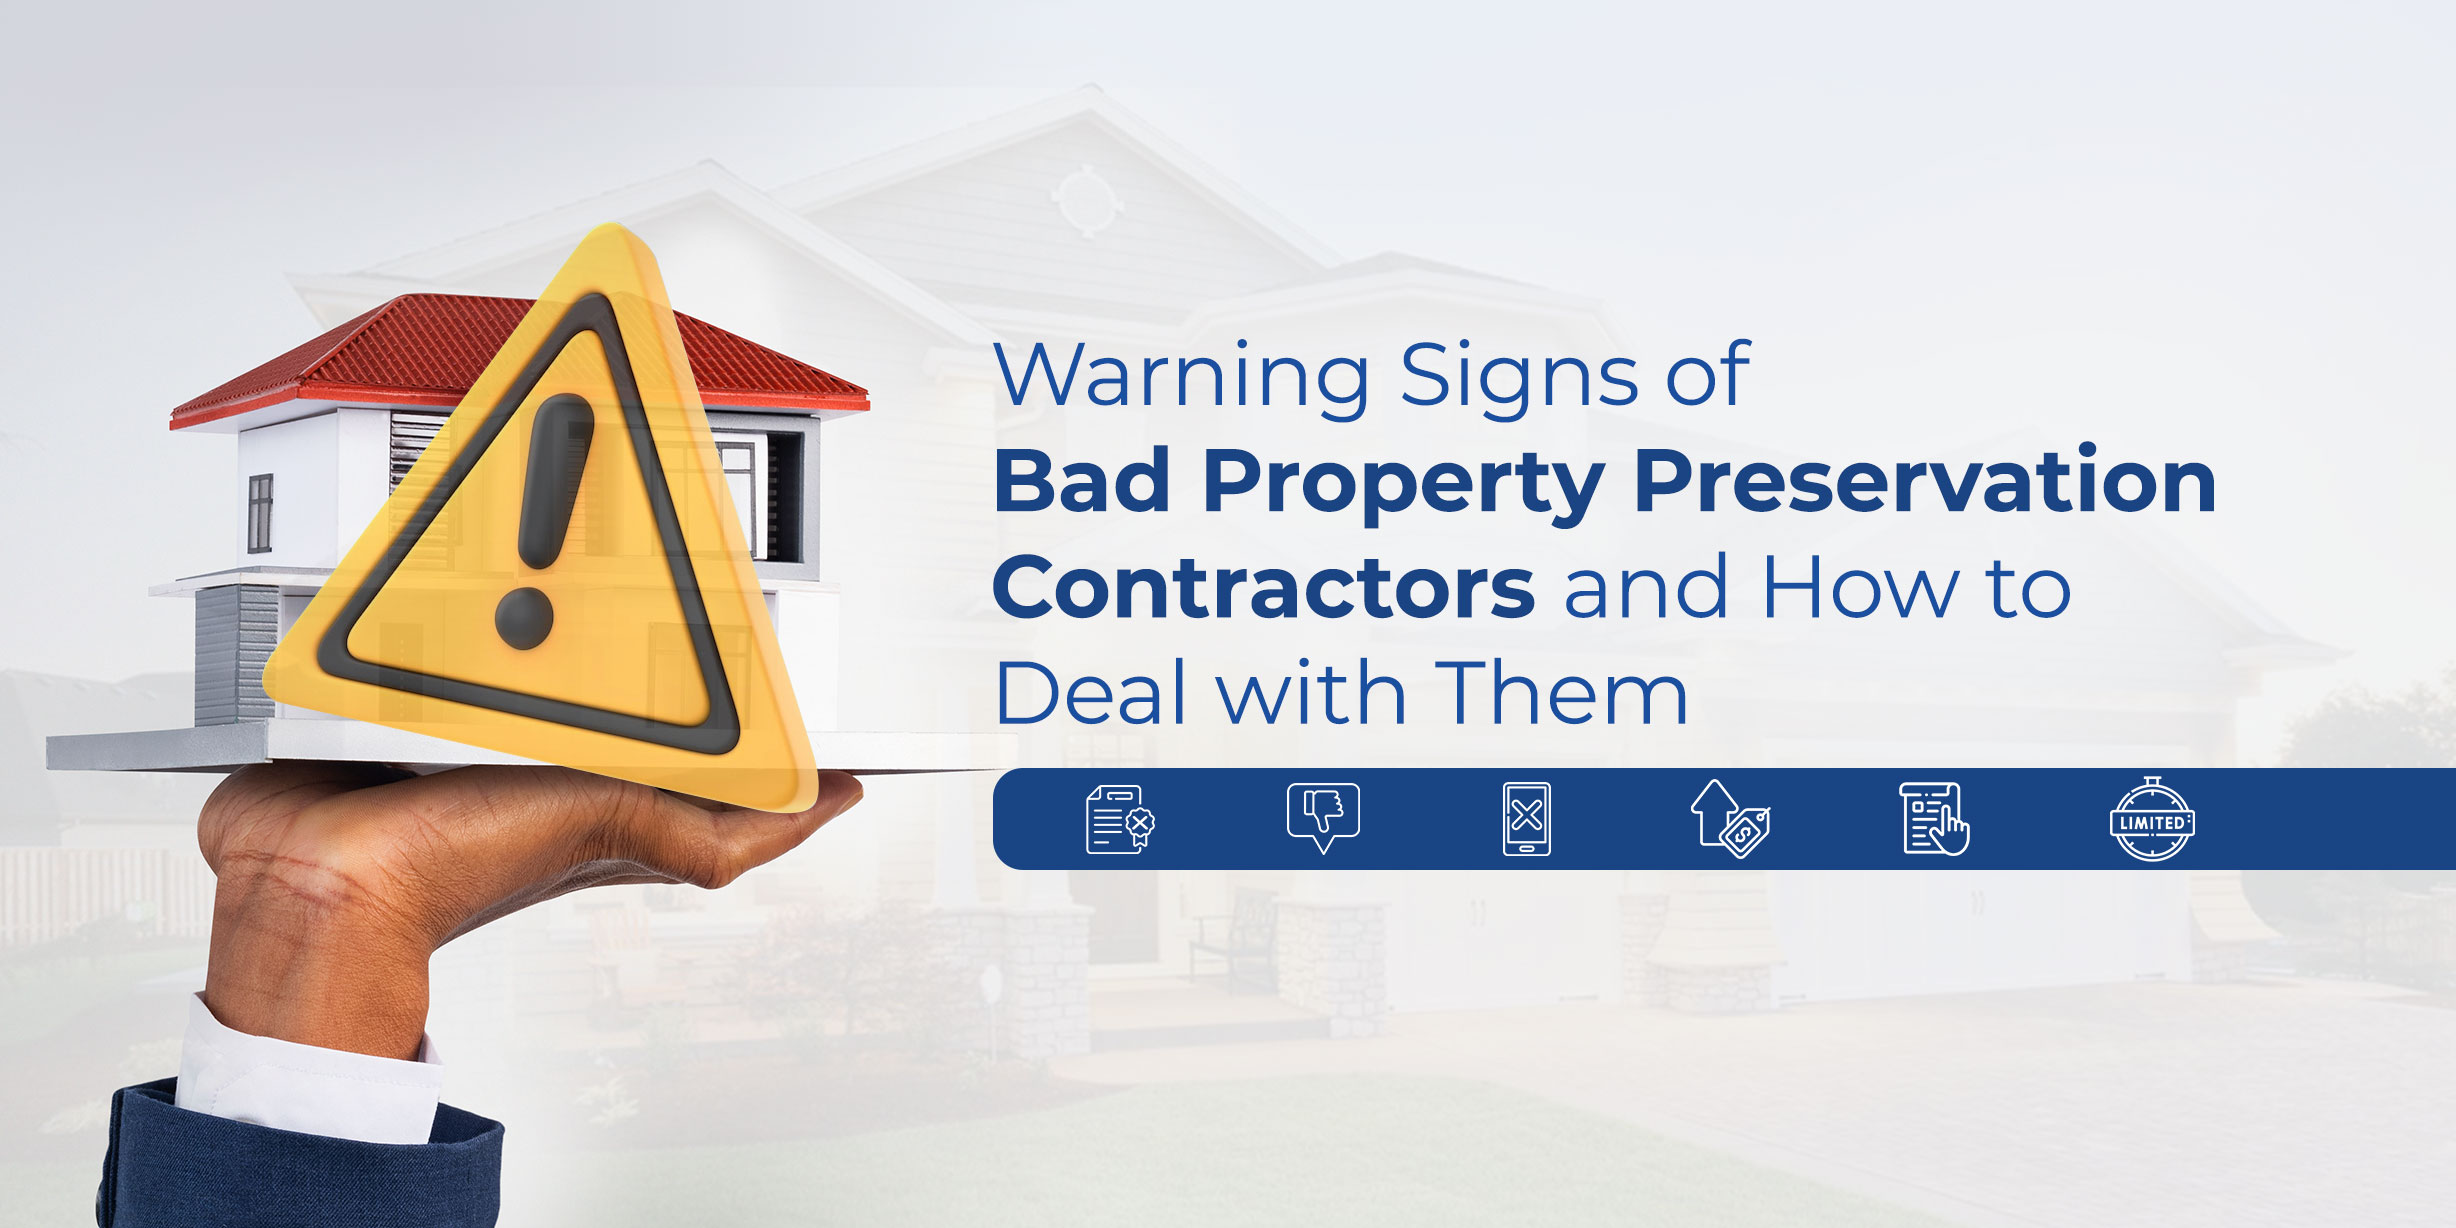 Warning Signs of Bad Property Preservation Contractors and How to Deal with Them